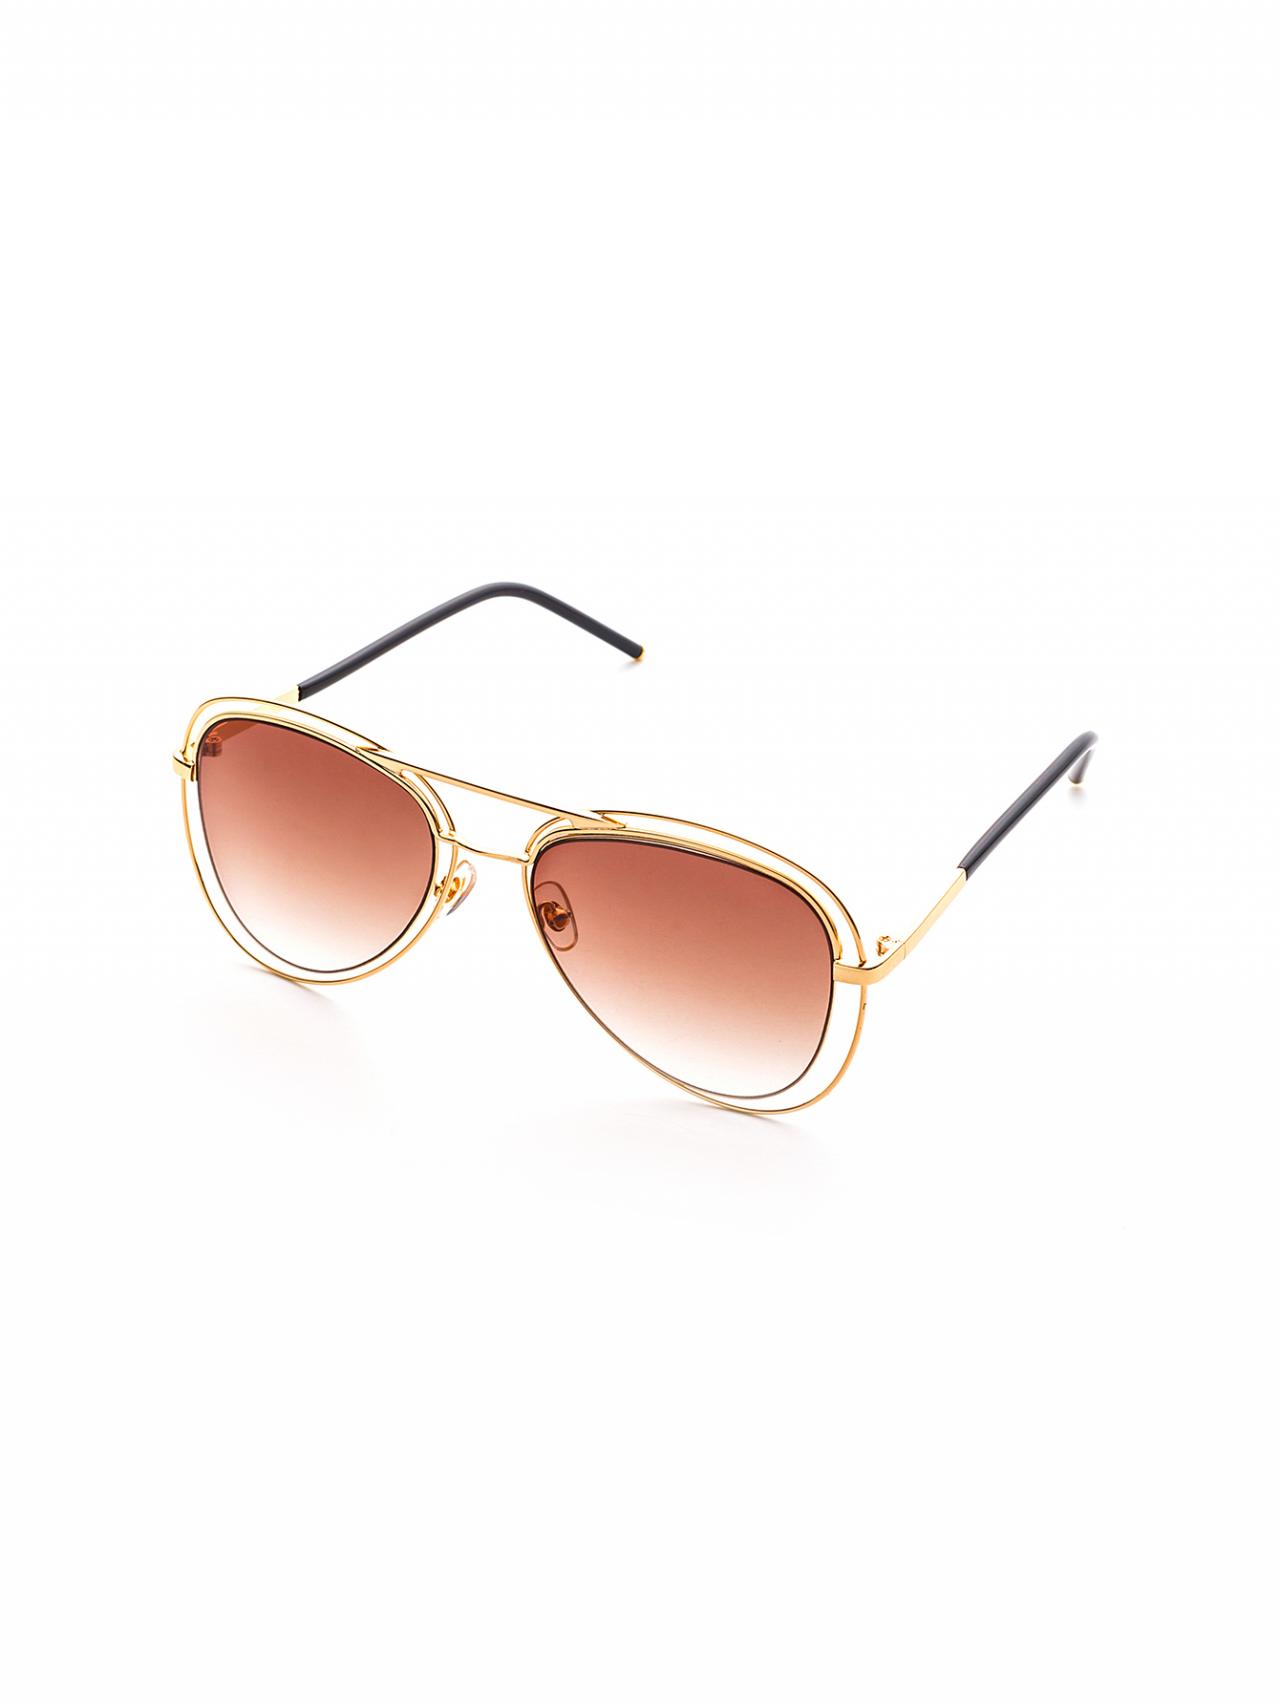 Double Gold Framed Aviators Featuring Brown Coloured Lens